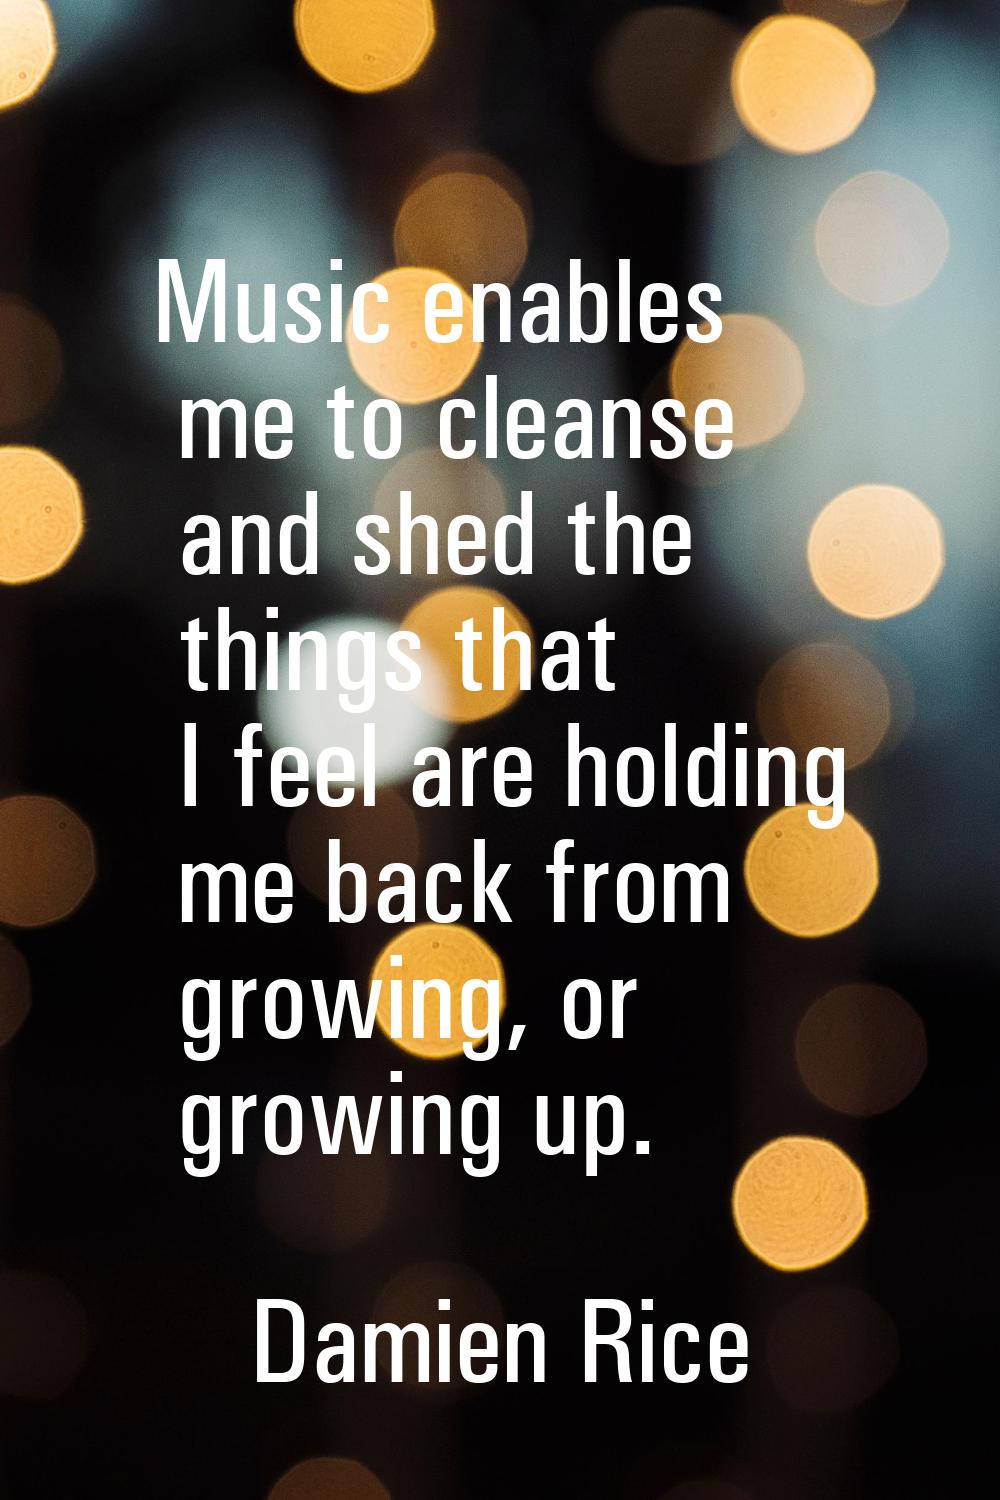 Music enables me to cleanse and shed the things that I feel are holding me back from growing, or gr